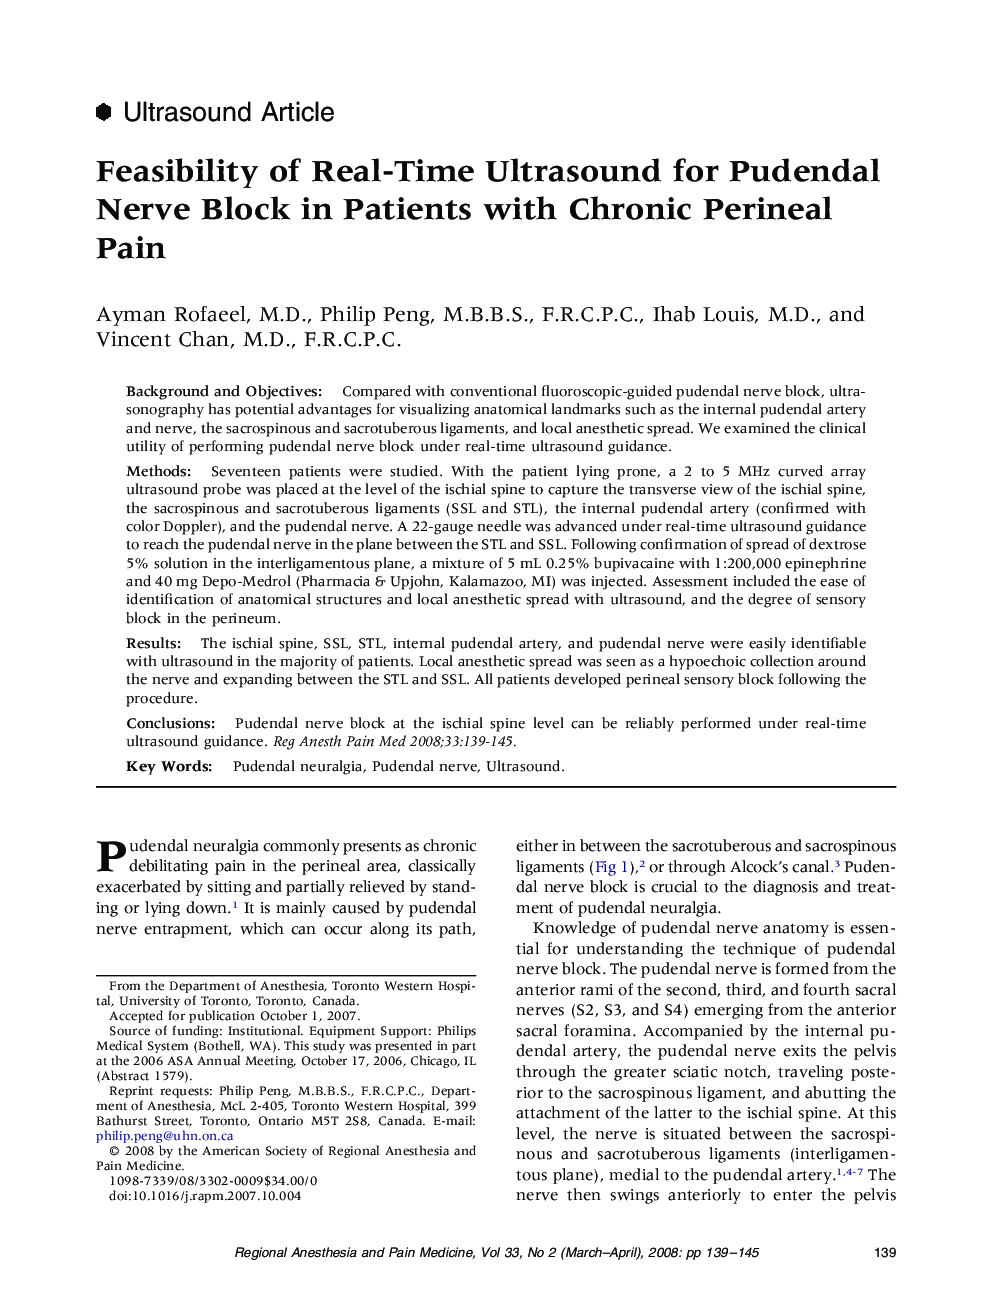 Feasibility of Real-Time Ultrasound for Pudendal Nerve Block in Patients with Chronic Perineal Pain